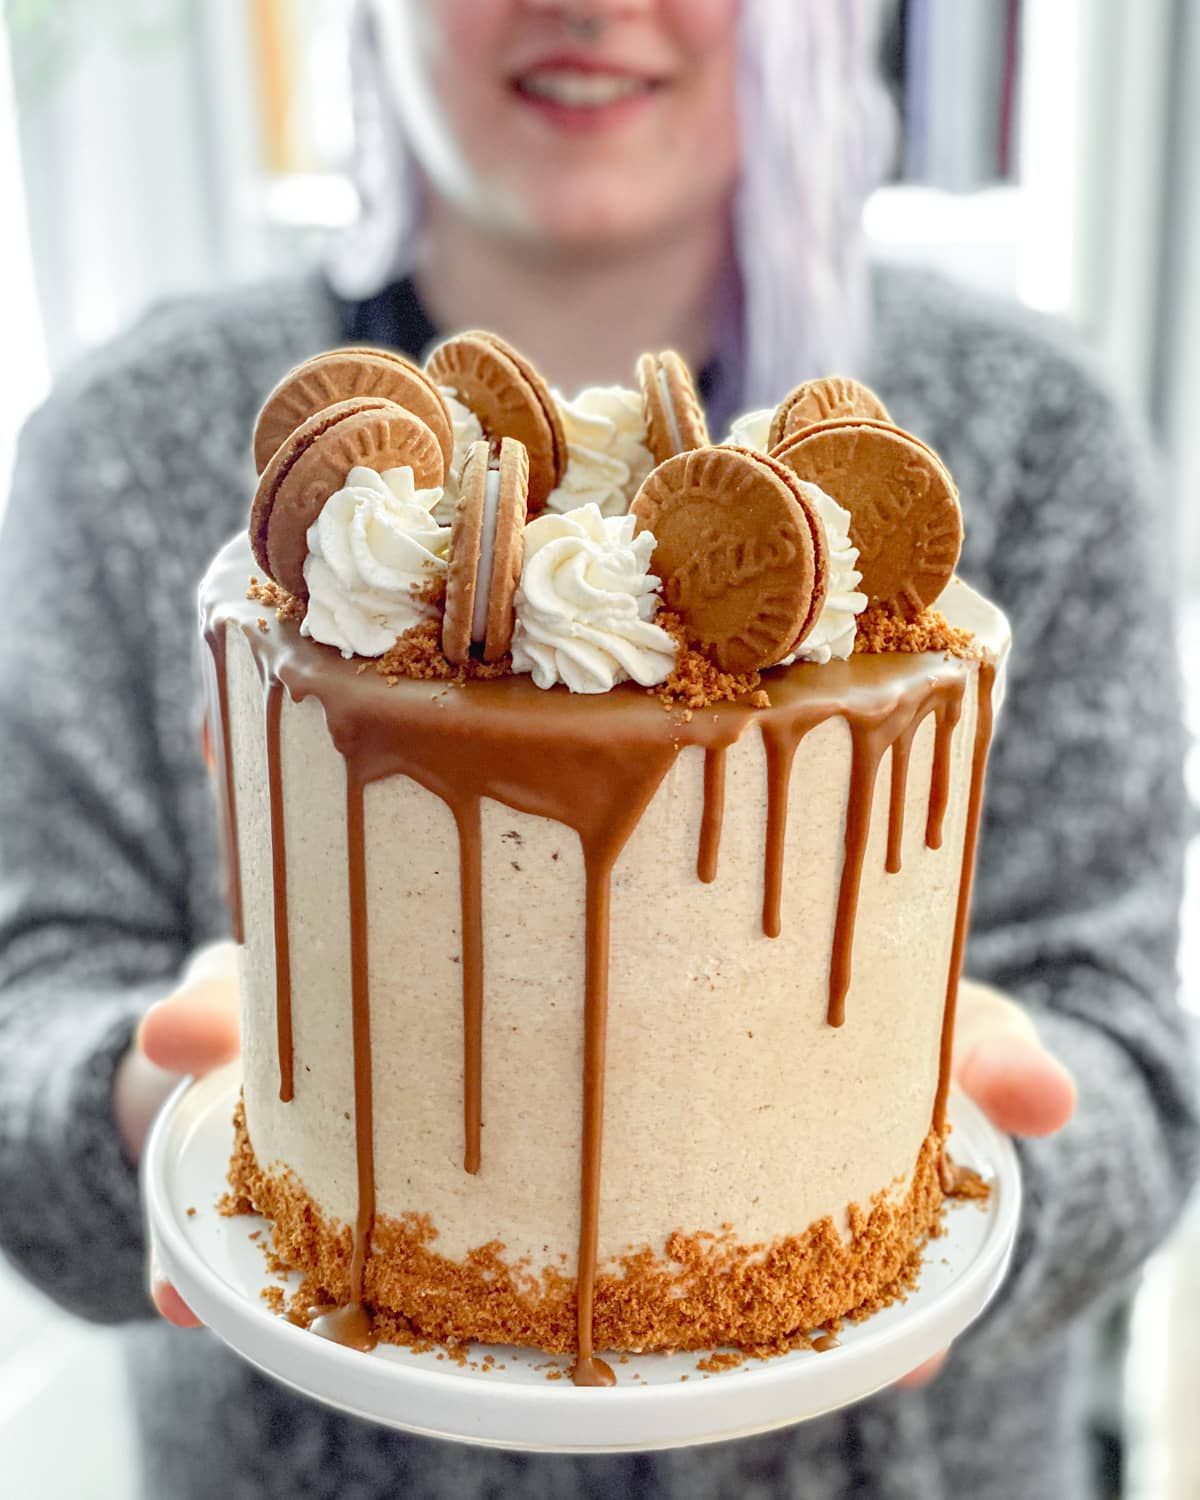 Vegan Speculoos drip cake being held in front of someone who is blurry.